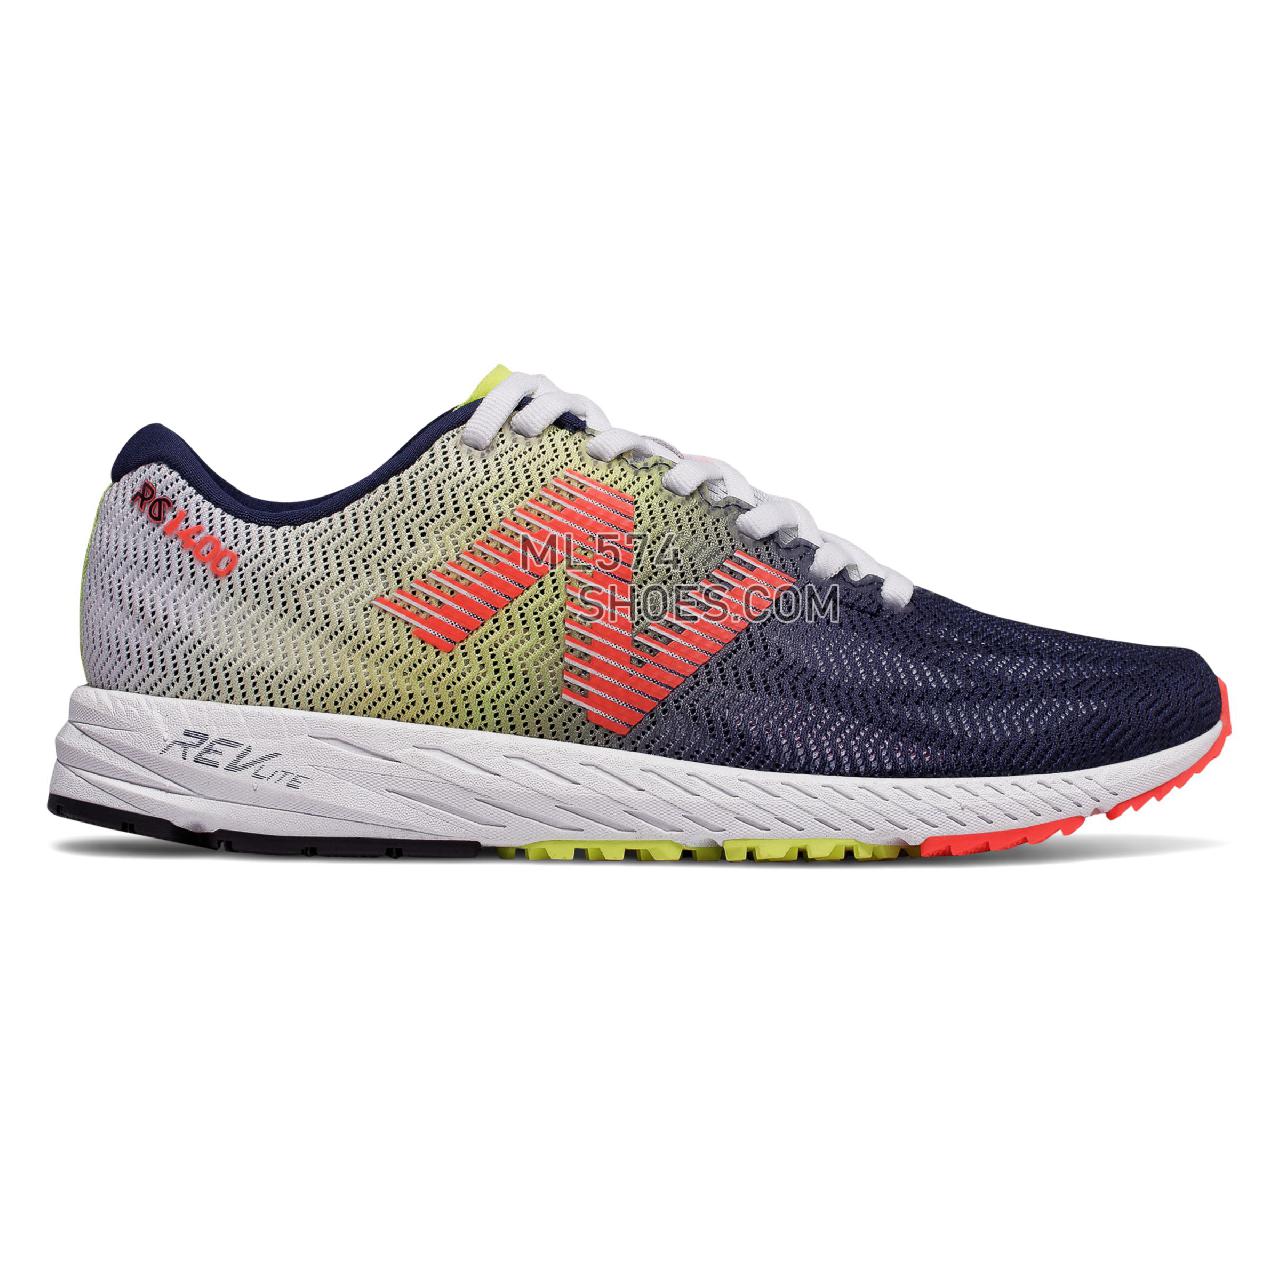 New Balance 1400v6 - Women's 1400 - Running White with Pigment and Vivid Coral - W1400BP6